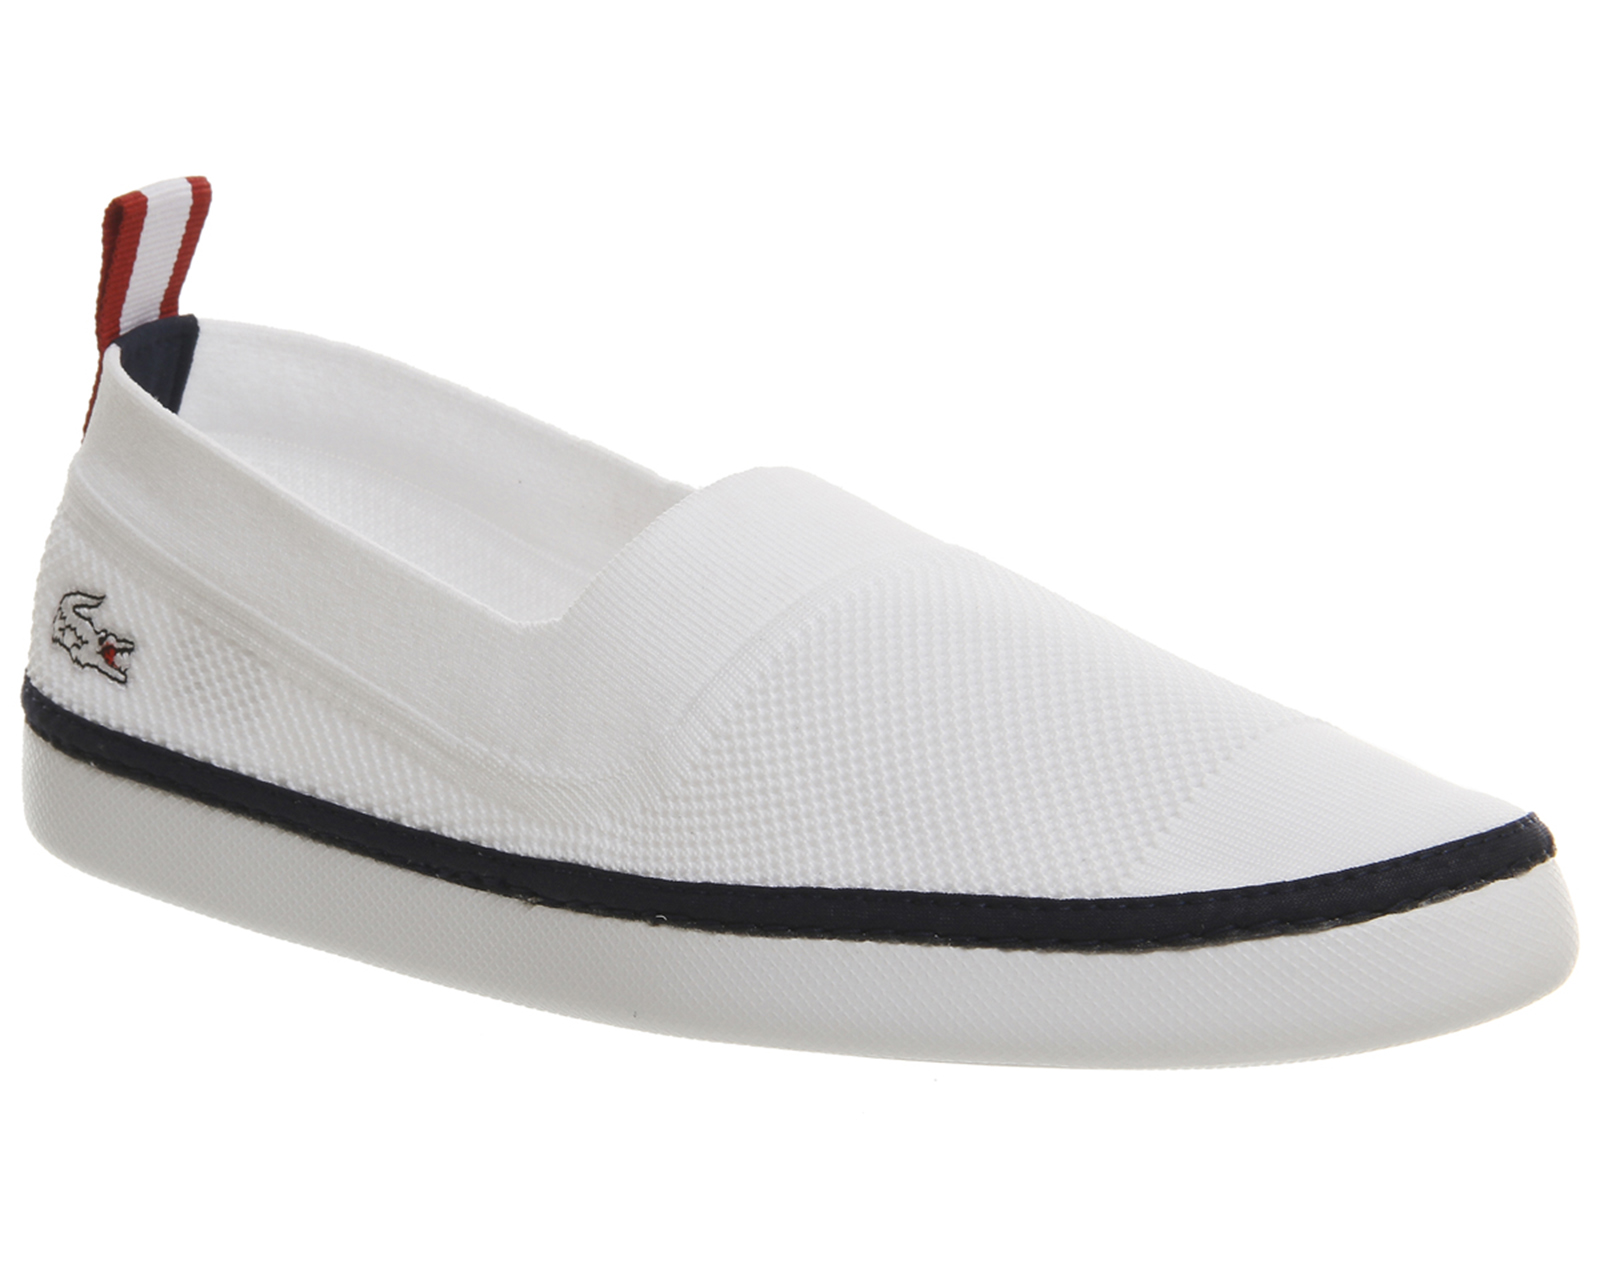 lacoste lydro trainers